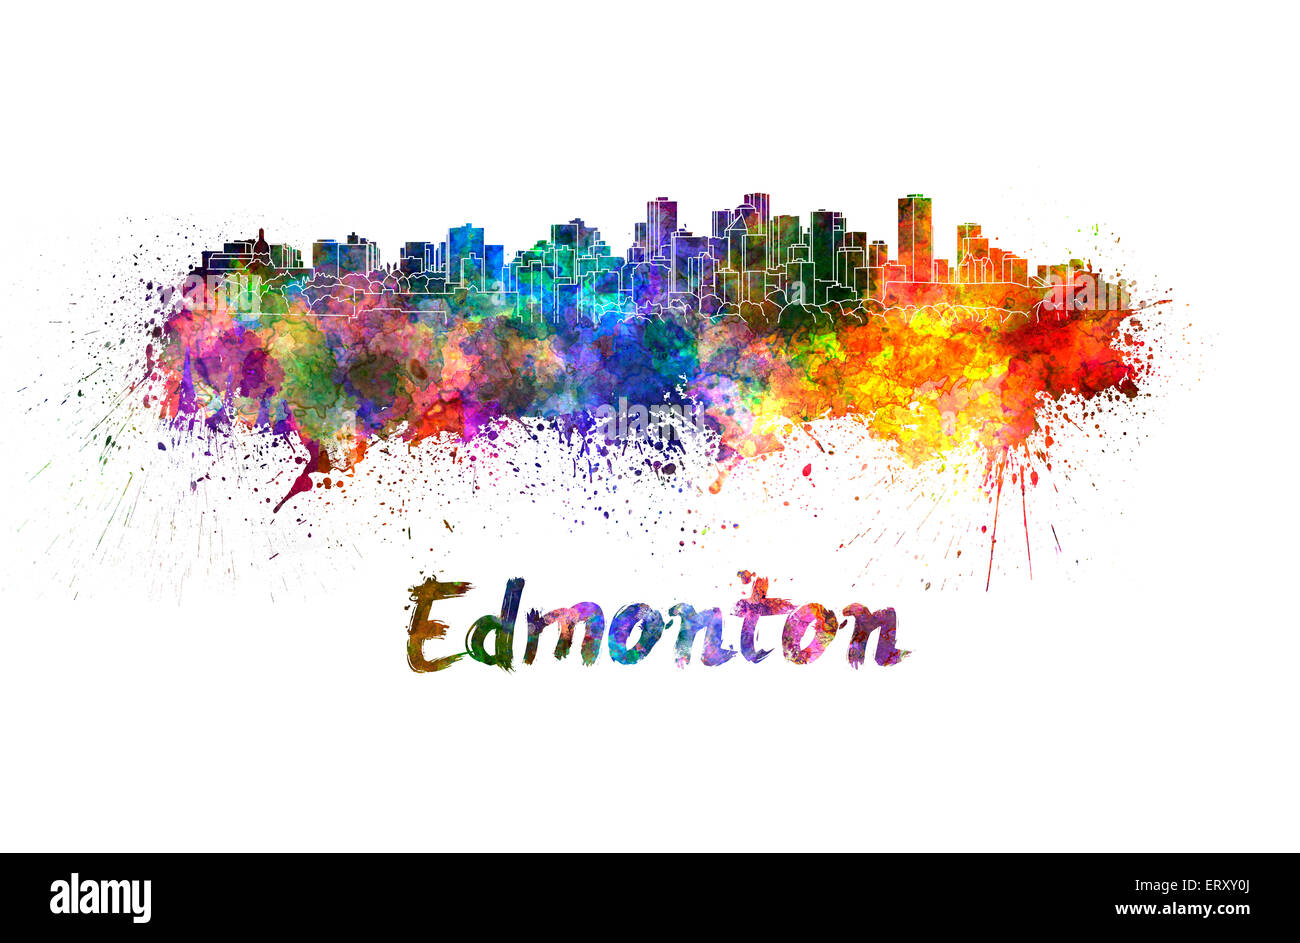 Edmonton skyline in watercolor splatters with clipping path Stock Photo